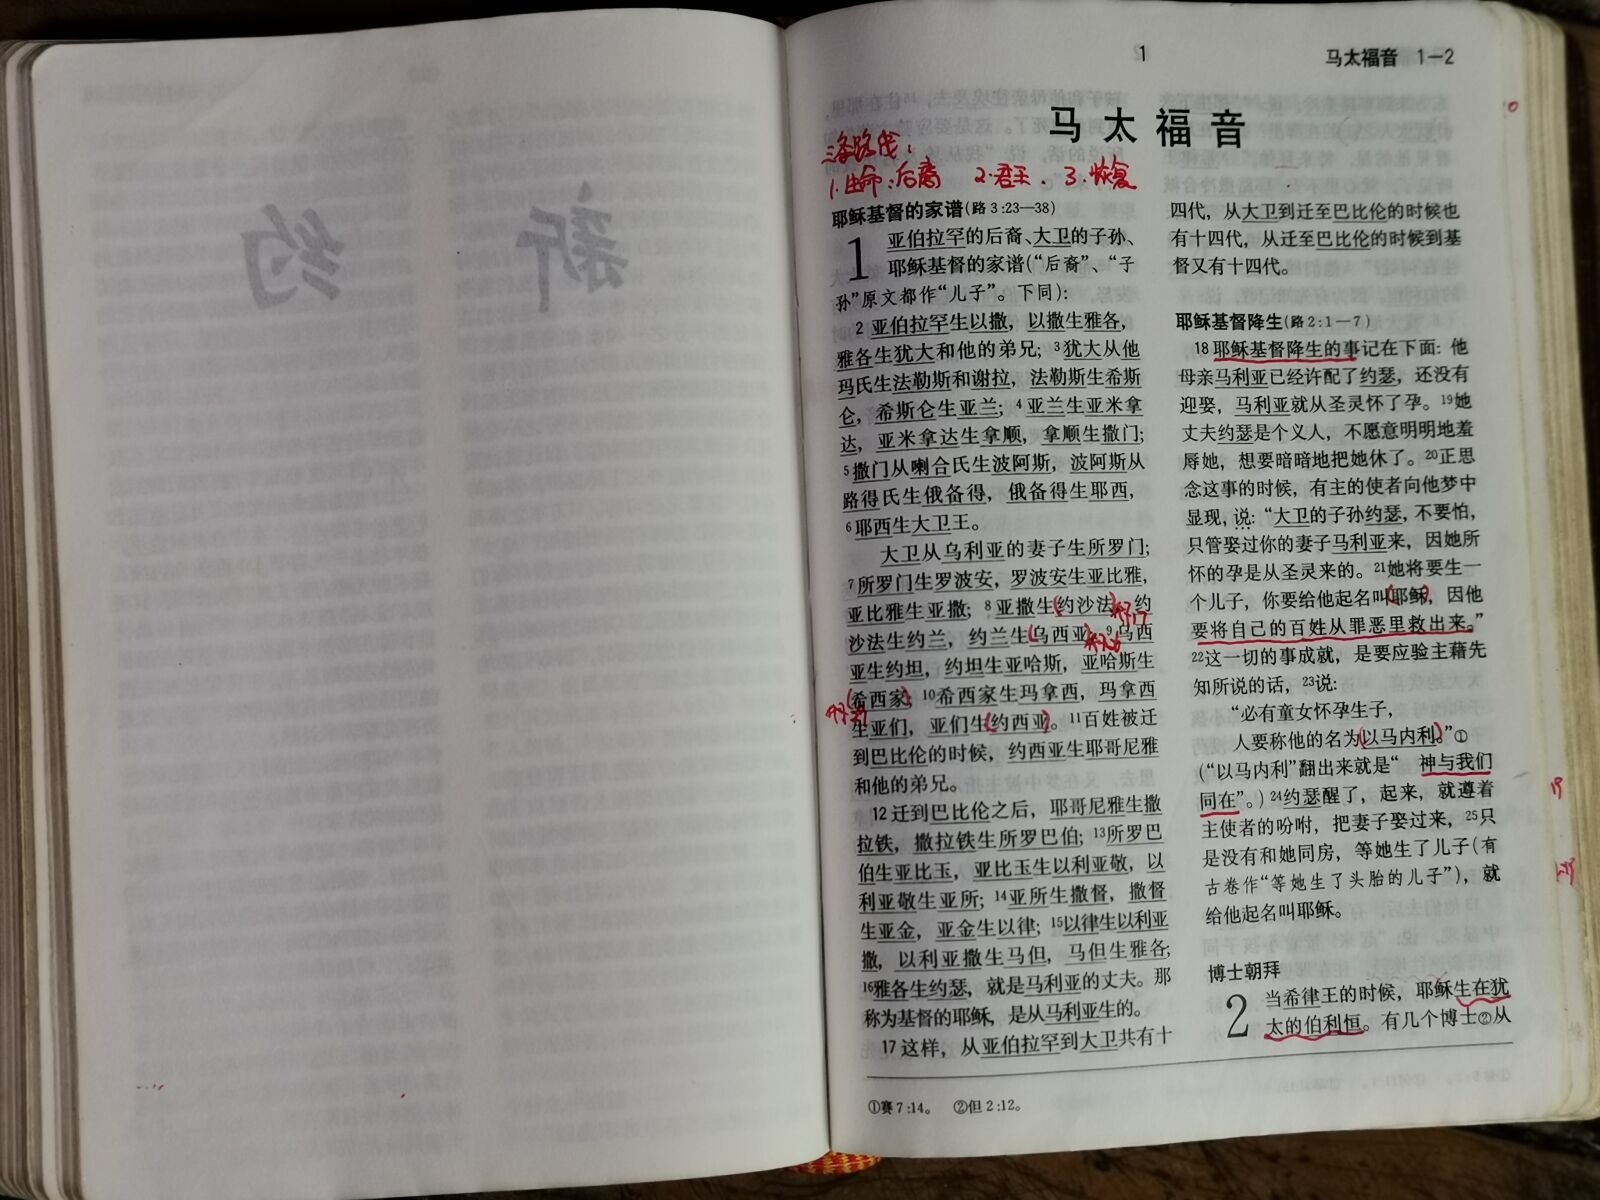 HUAWEI Mate 20 Pro sample photo. Chinese bible, bible, within photography